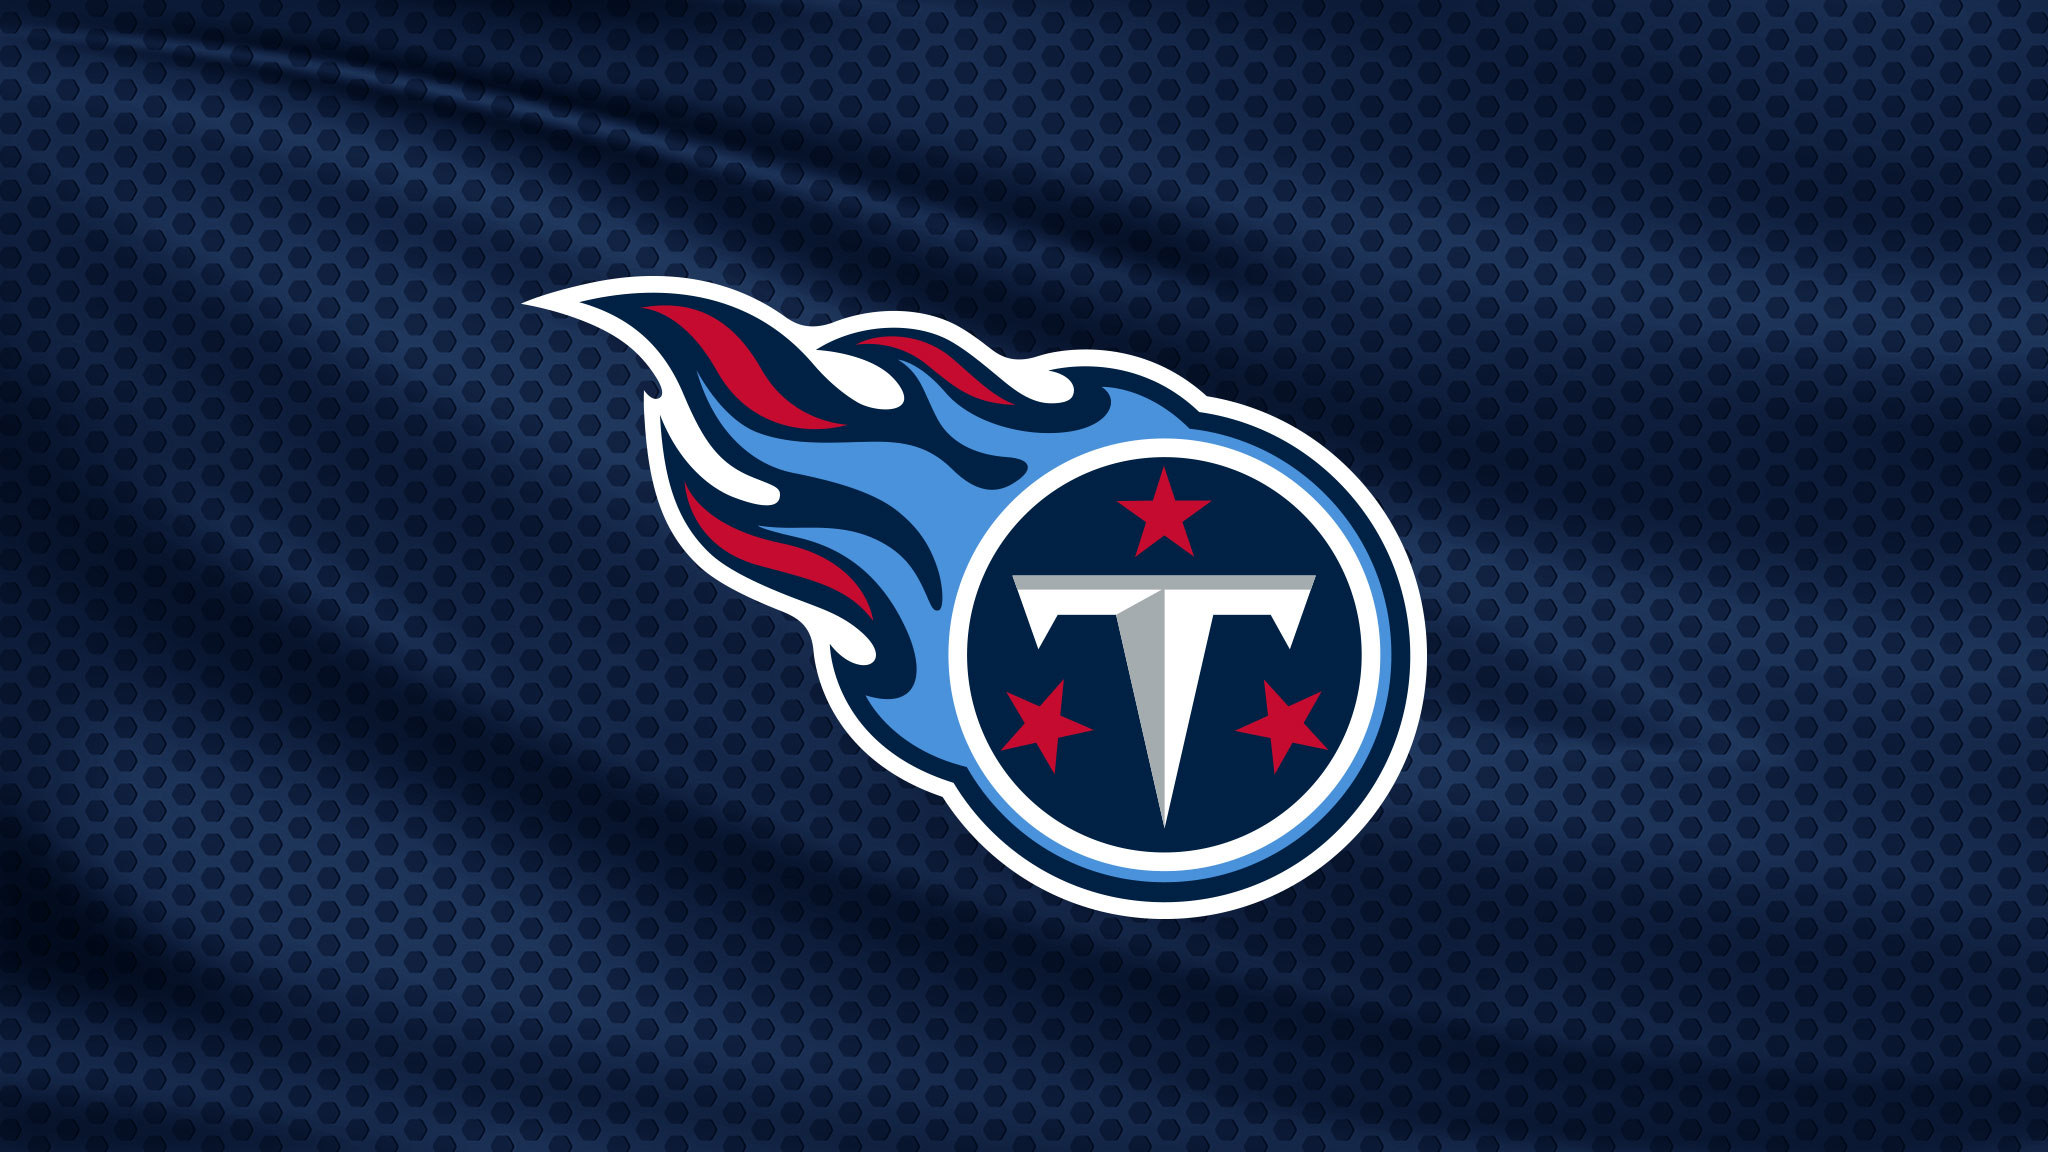 Tennessee Titans vs. New York Jets